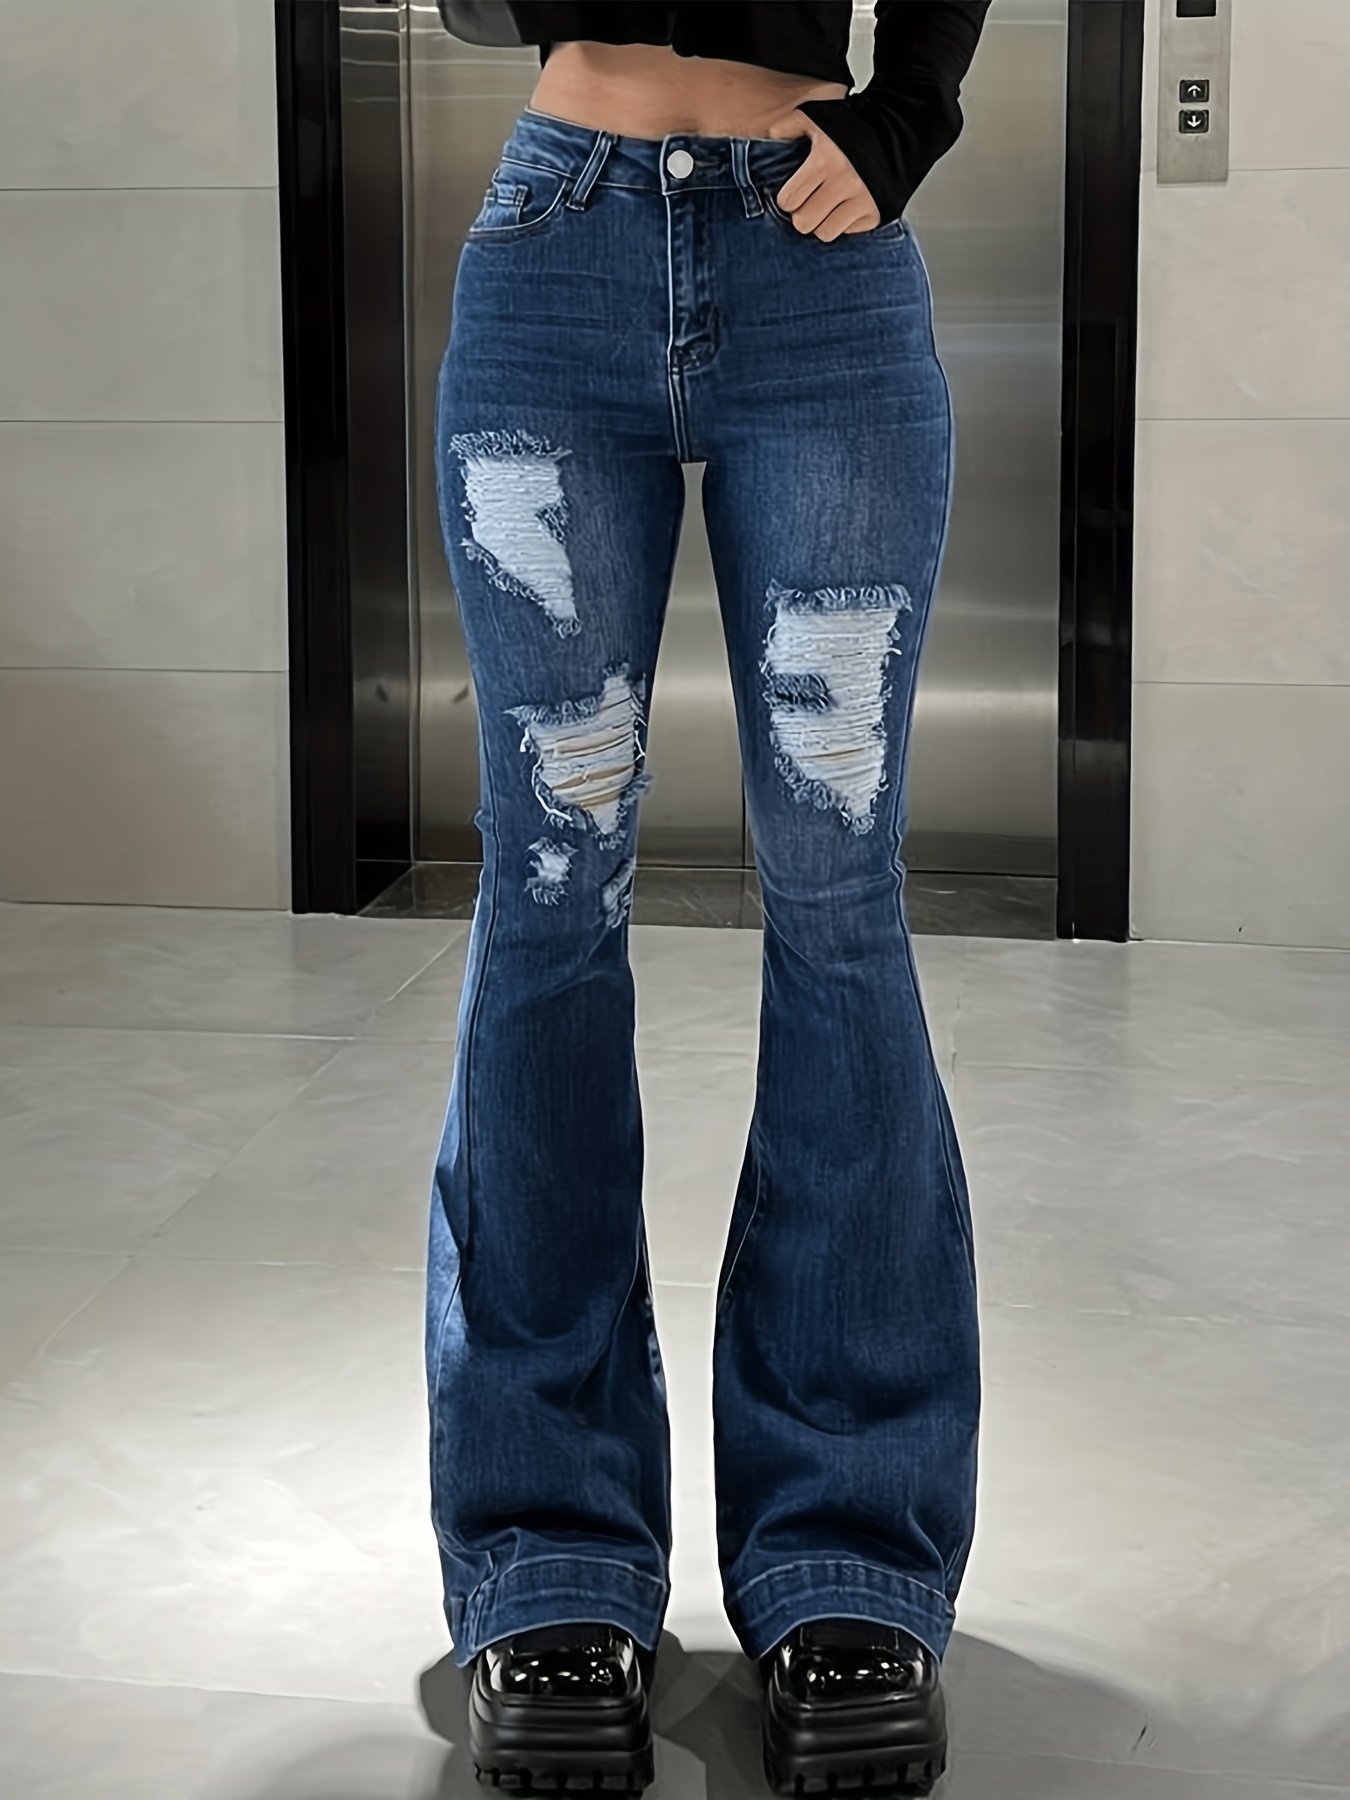 CuteCherry Bell Bottom Jeans for Women Ripped Distressed Flare